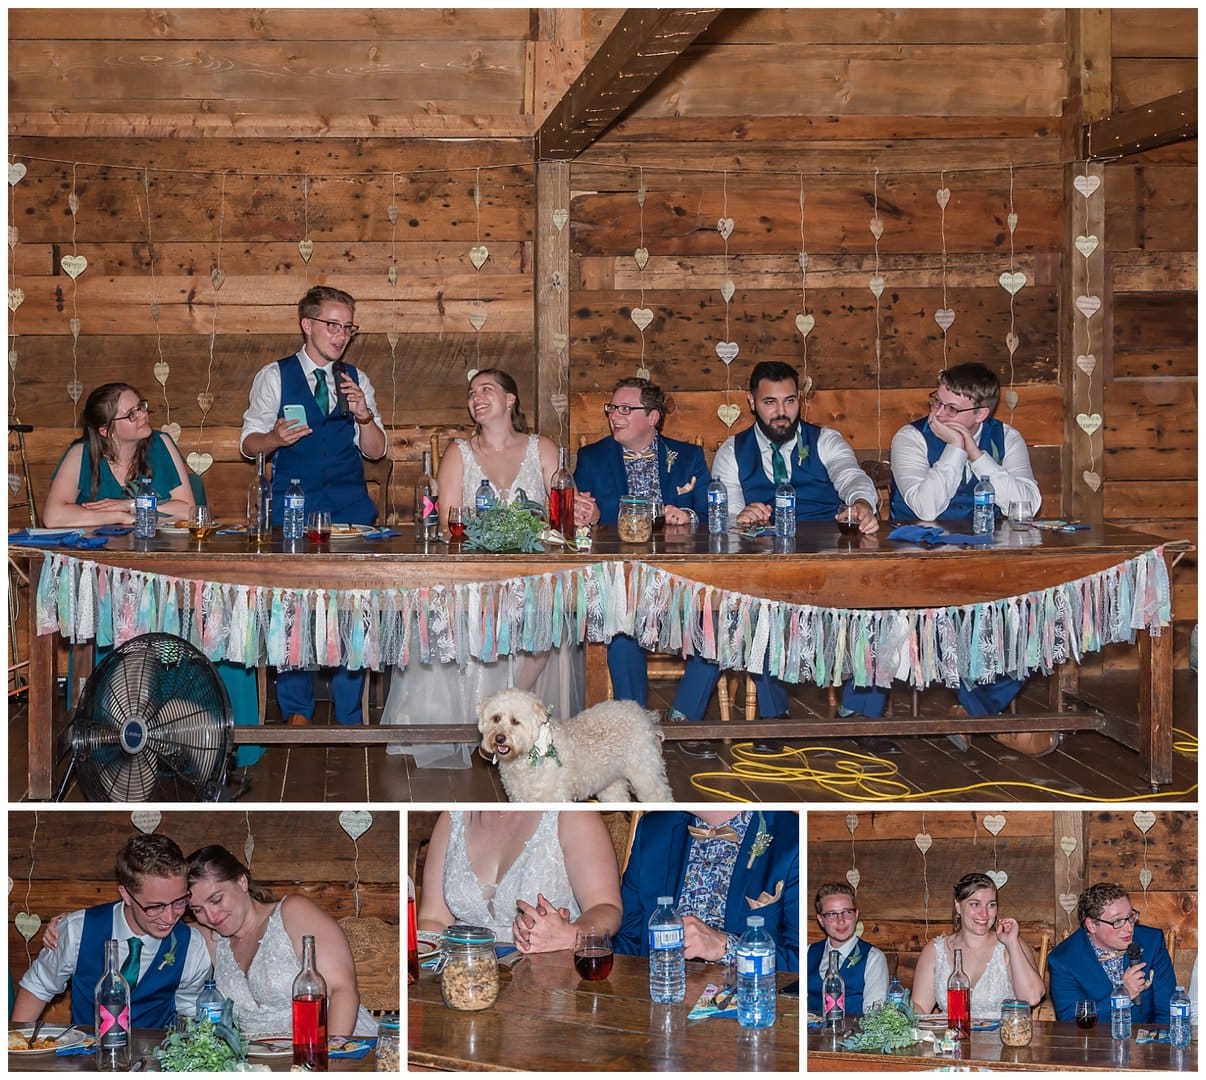 A groomsmen gives a heartfelt speech to his sister the bride during her wedding reception at the barn at Sadie Belle Farm.